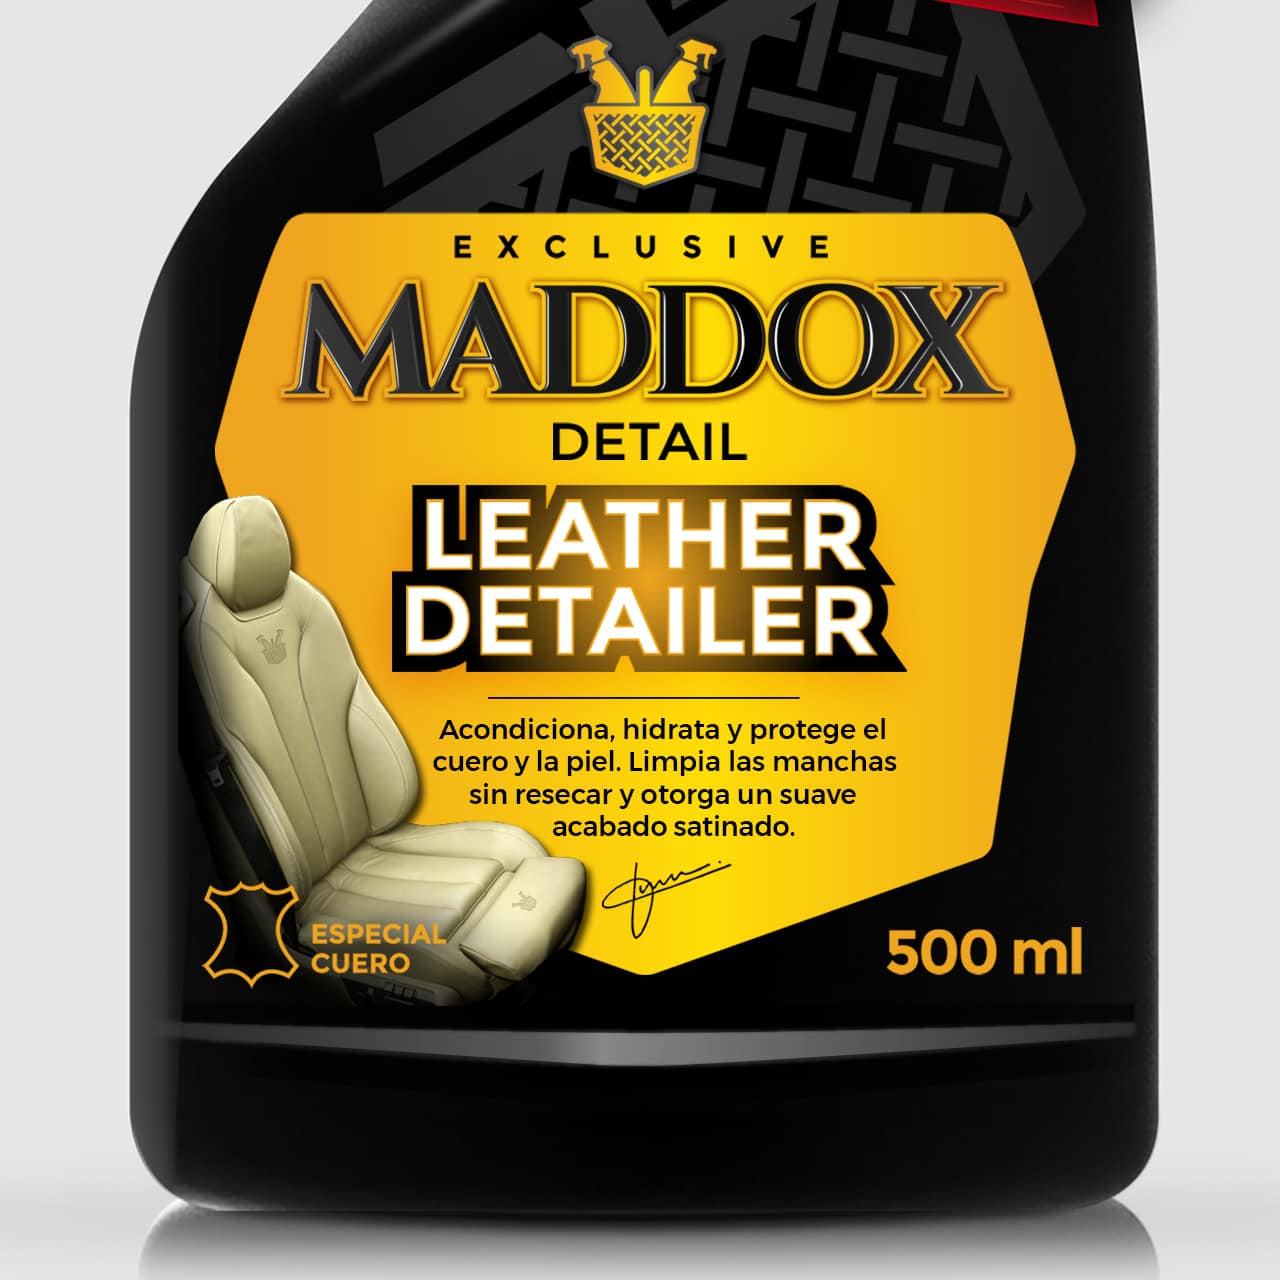 LEATHER DETAILER – Maddox Detail